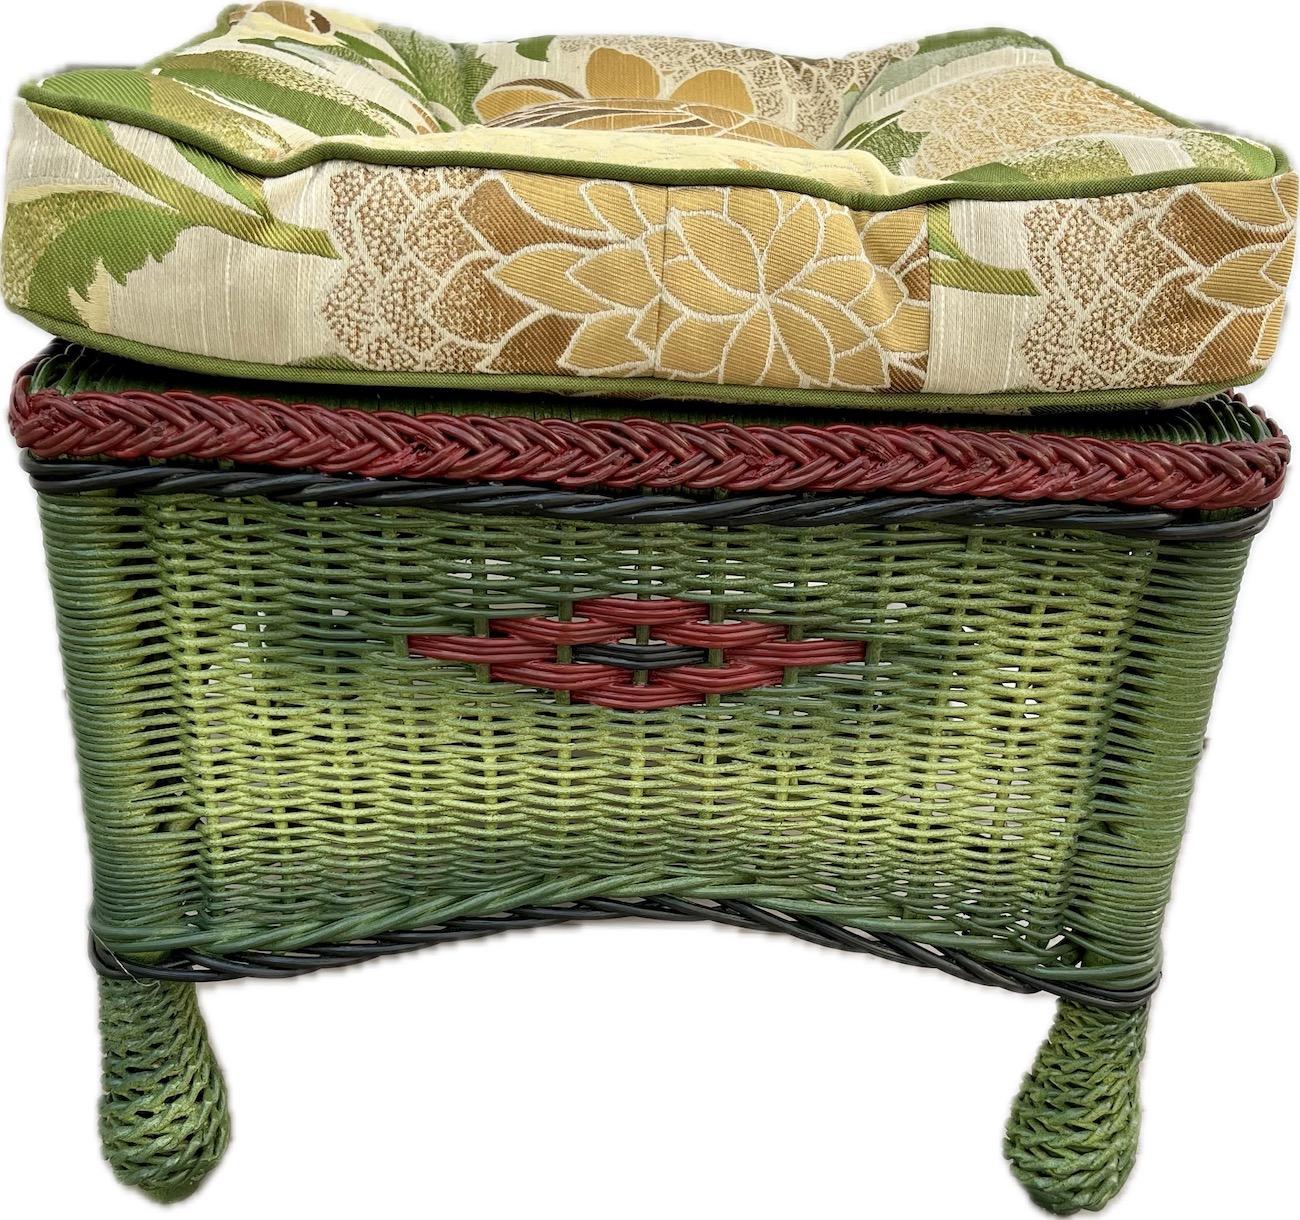 A fairly rare and unique wicker ottoman made by the Heywood Wakefield Company Gardner,Ma. C.1920. This handsome wicker ottoman is made with a closely woven reed design in a shaded French green finish with black and red trimming, It is fully skirted